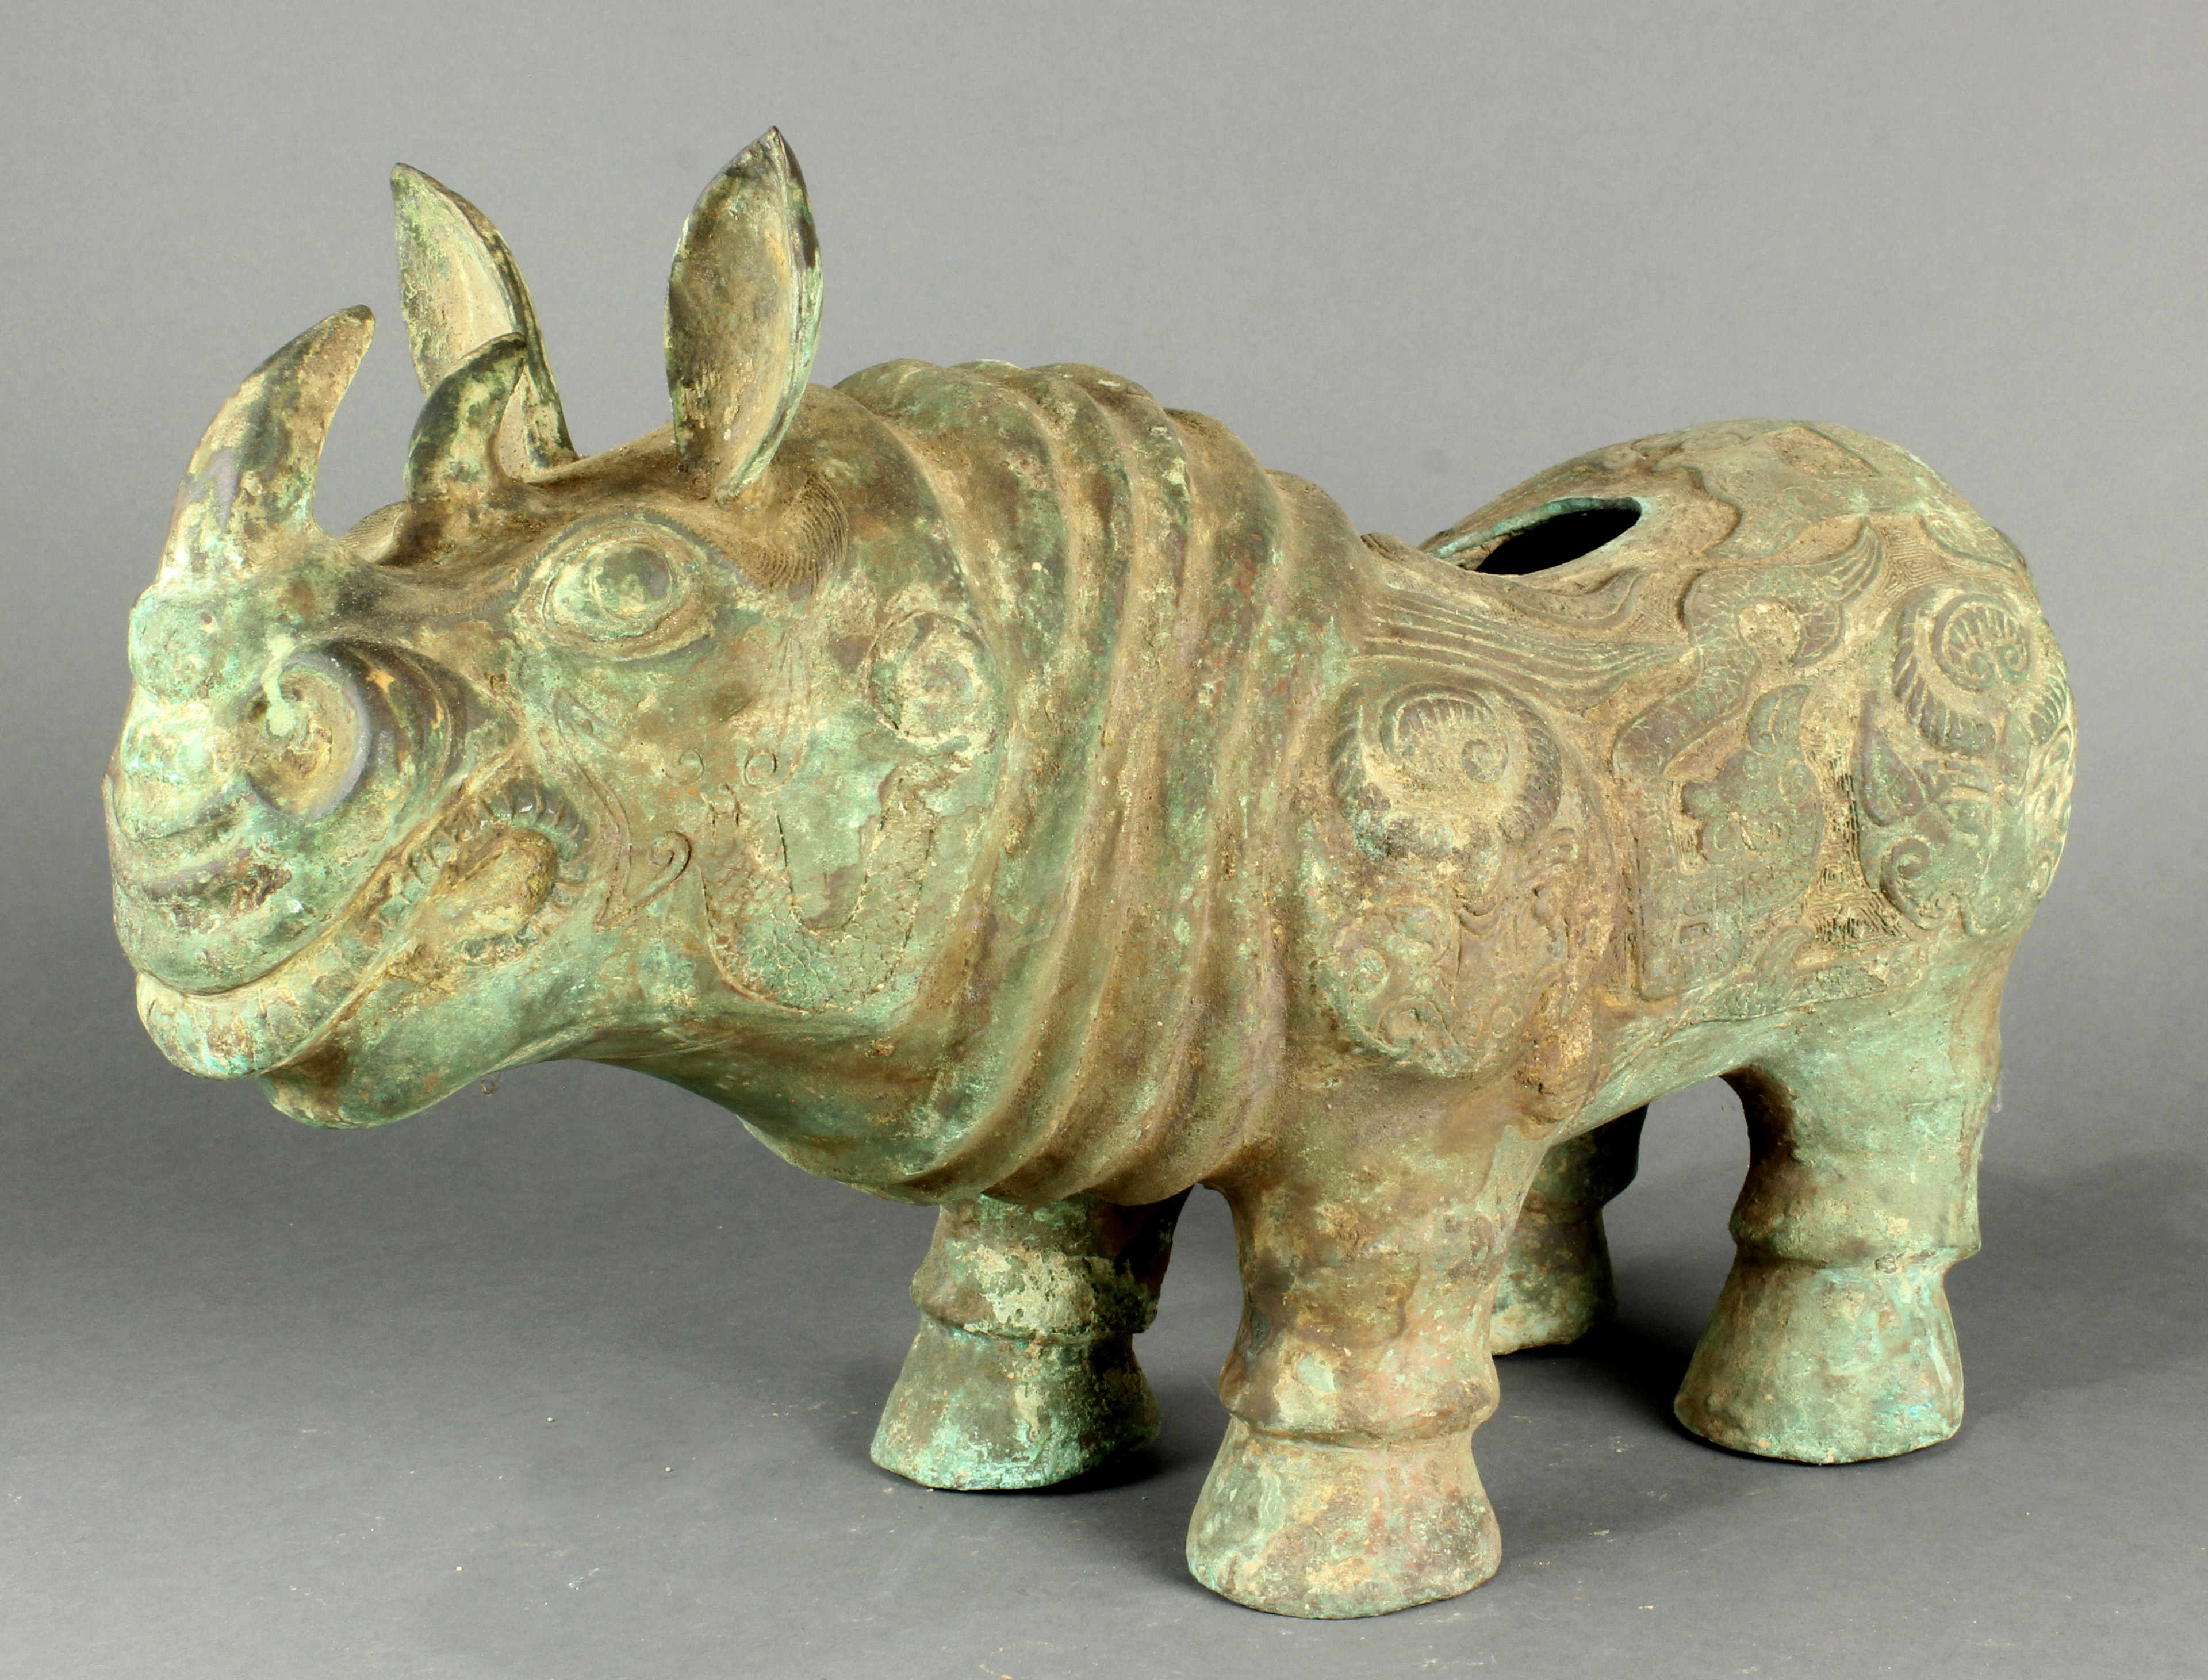 CHINESE ARCHAISCTIC BRONZE RHINO 3a67d6